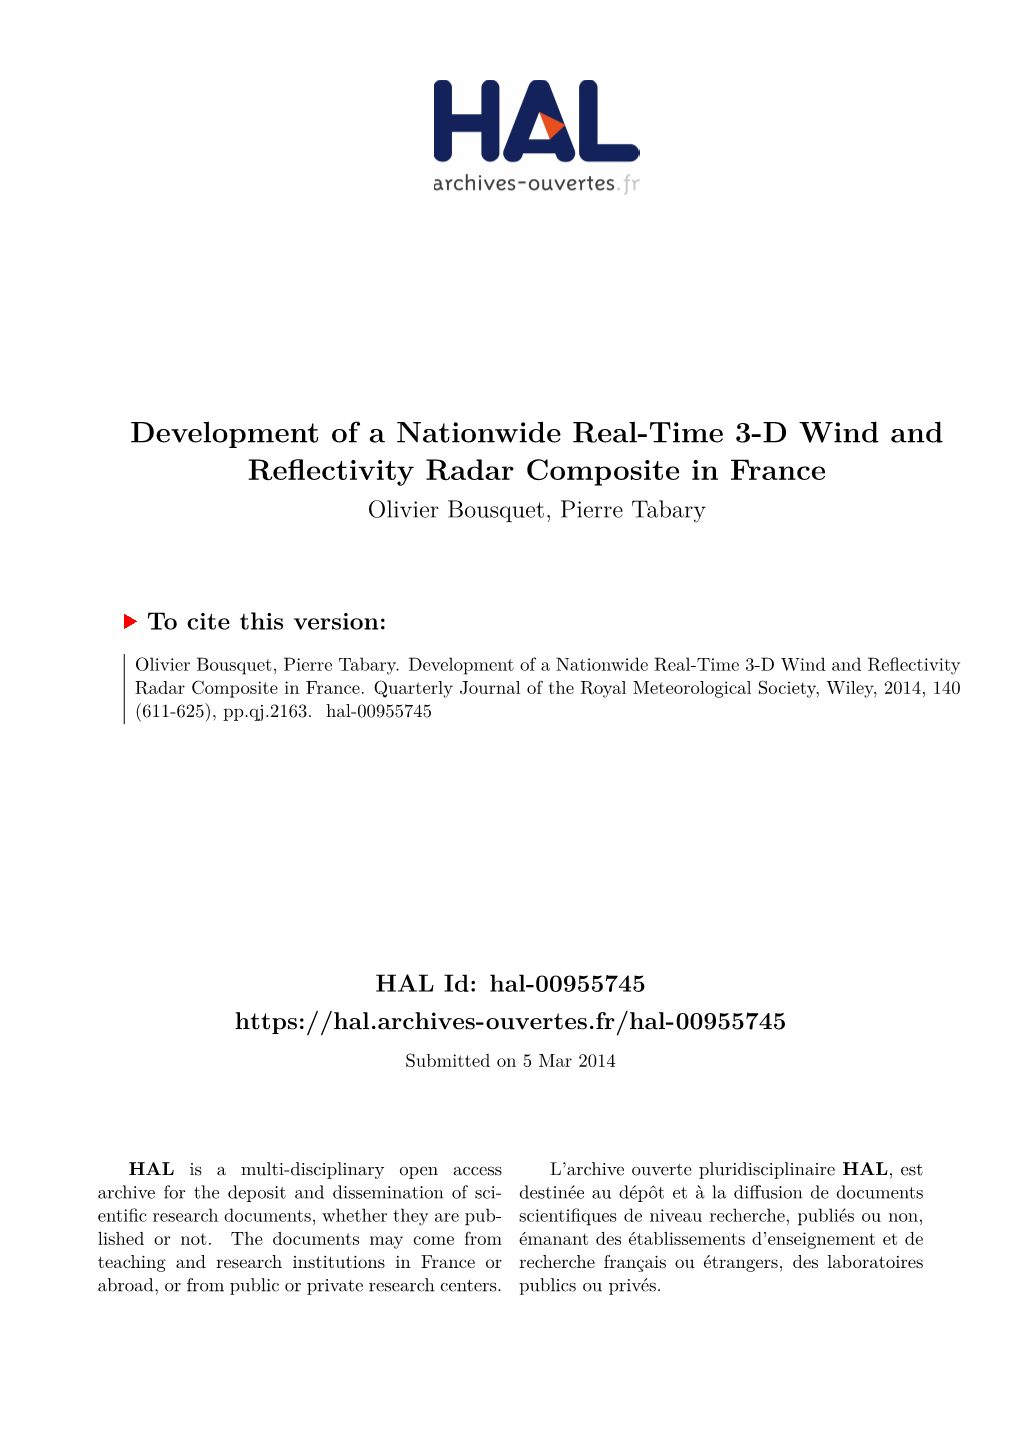 Development of a Nationwide Real-Time 3-D Wind and Reflectivity Radar Composite in France Olivier Bousquet, Pierre Tabary